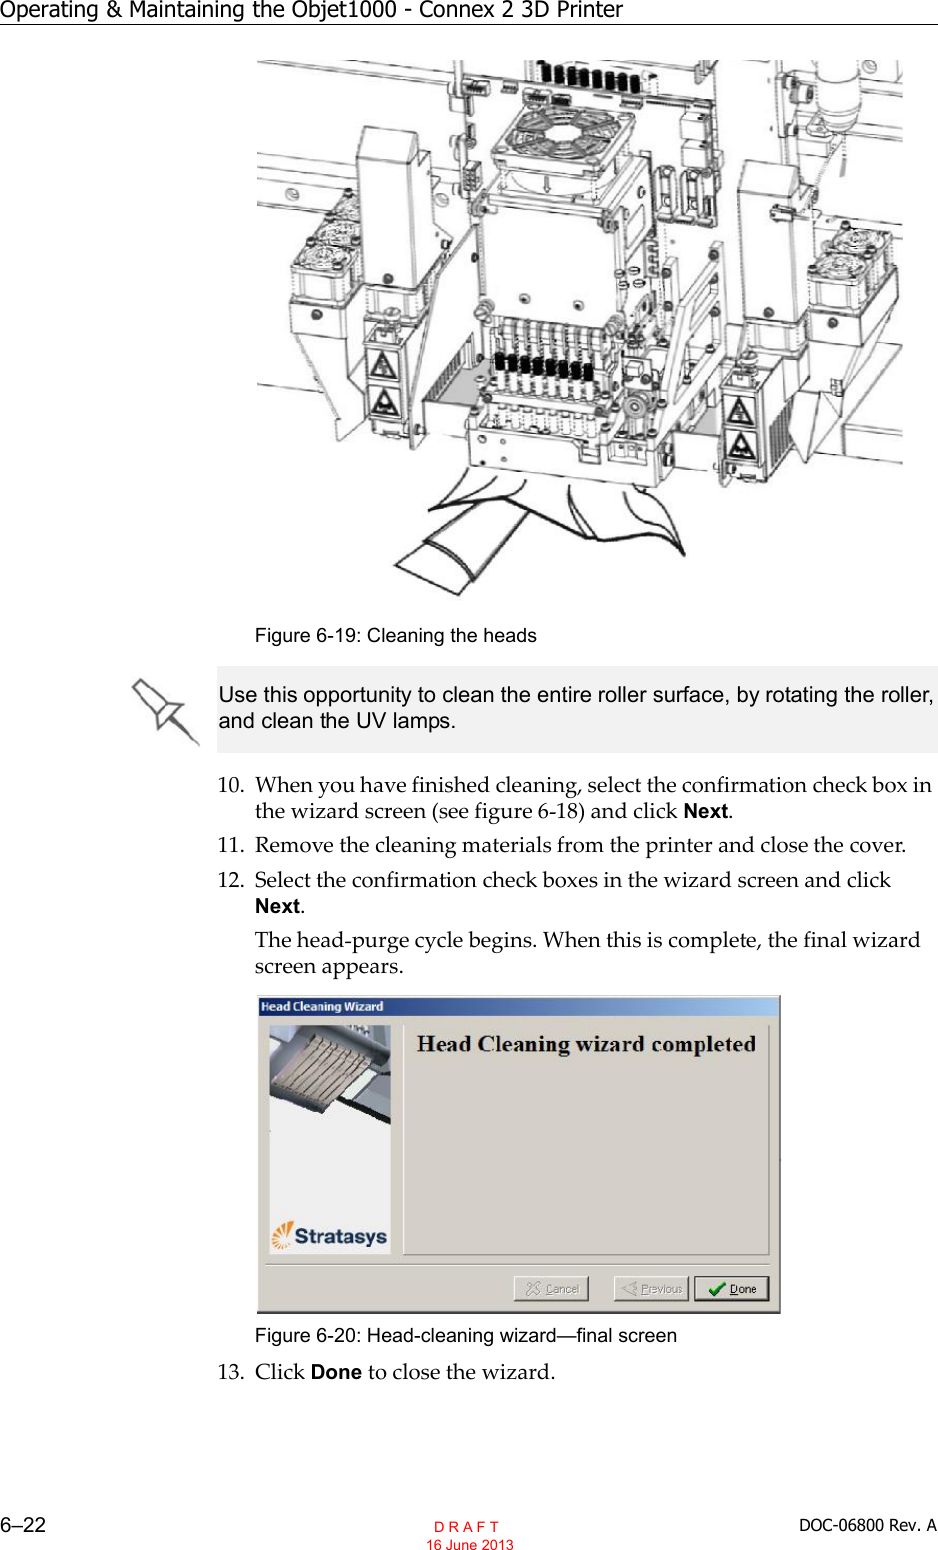 Operating &amp; Maintaining the Objet1000 - Connex 2 3D Printer6–22 DOC-06800 Rev. AFigure 6-19: Cleaning the heads10. When you have finished cleaning, select the confirmation check box inthe wizard screen (see figure 6 18) and click Next.11. Remove the cleaning materials from the printer and close the cover.12. Select the confirmation check boxes in the wizard screen and clickNext.The head purge cycle begins. When this is complete, the final wizardscreen appears.Figure 6-20: Head-cleaning wizard—final screen13. Click Done to close the wizard.Use this opportunity to clean the entire roller surface, by rotating the roller, and clean the UV lamps.  D R A F T 16 June 2013